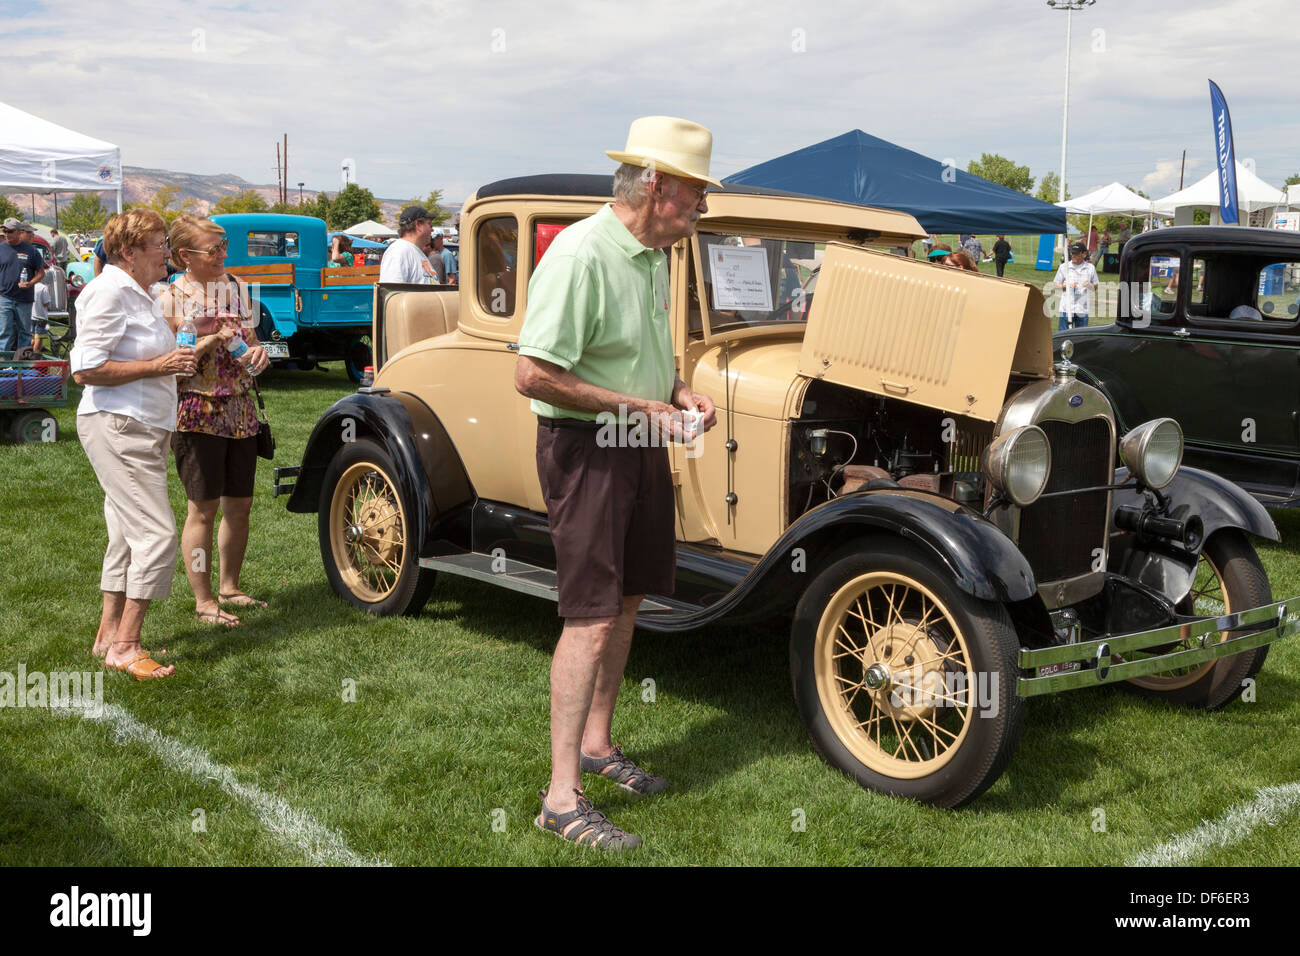 Spectators at the Colorado Classic Car show at Grand Junction, looking at a customised 1929 Ford Model A coupe, USA Stock Photo